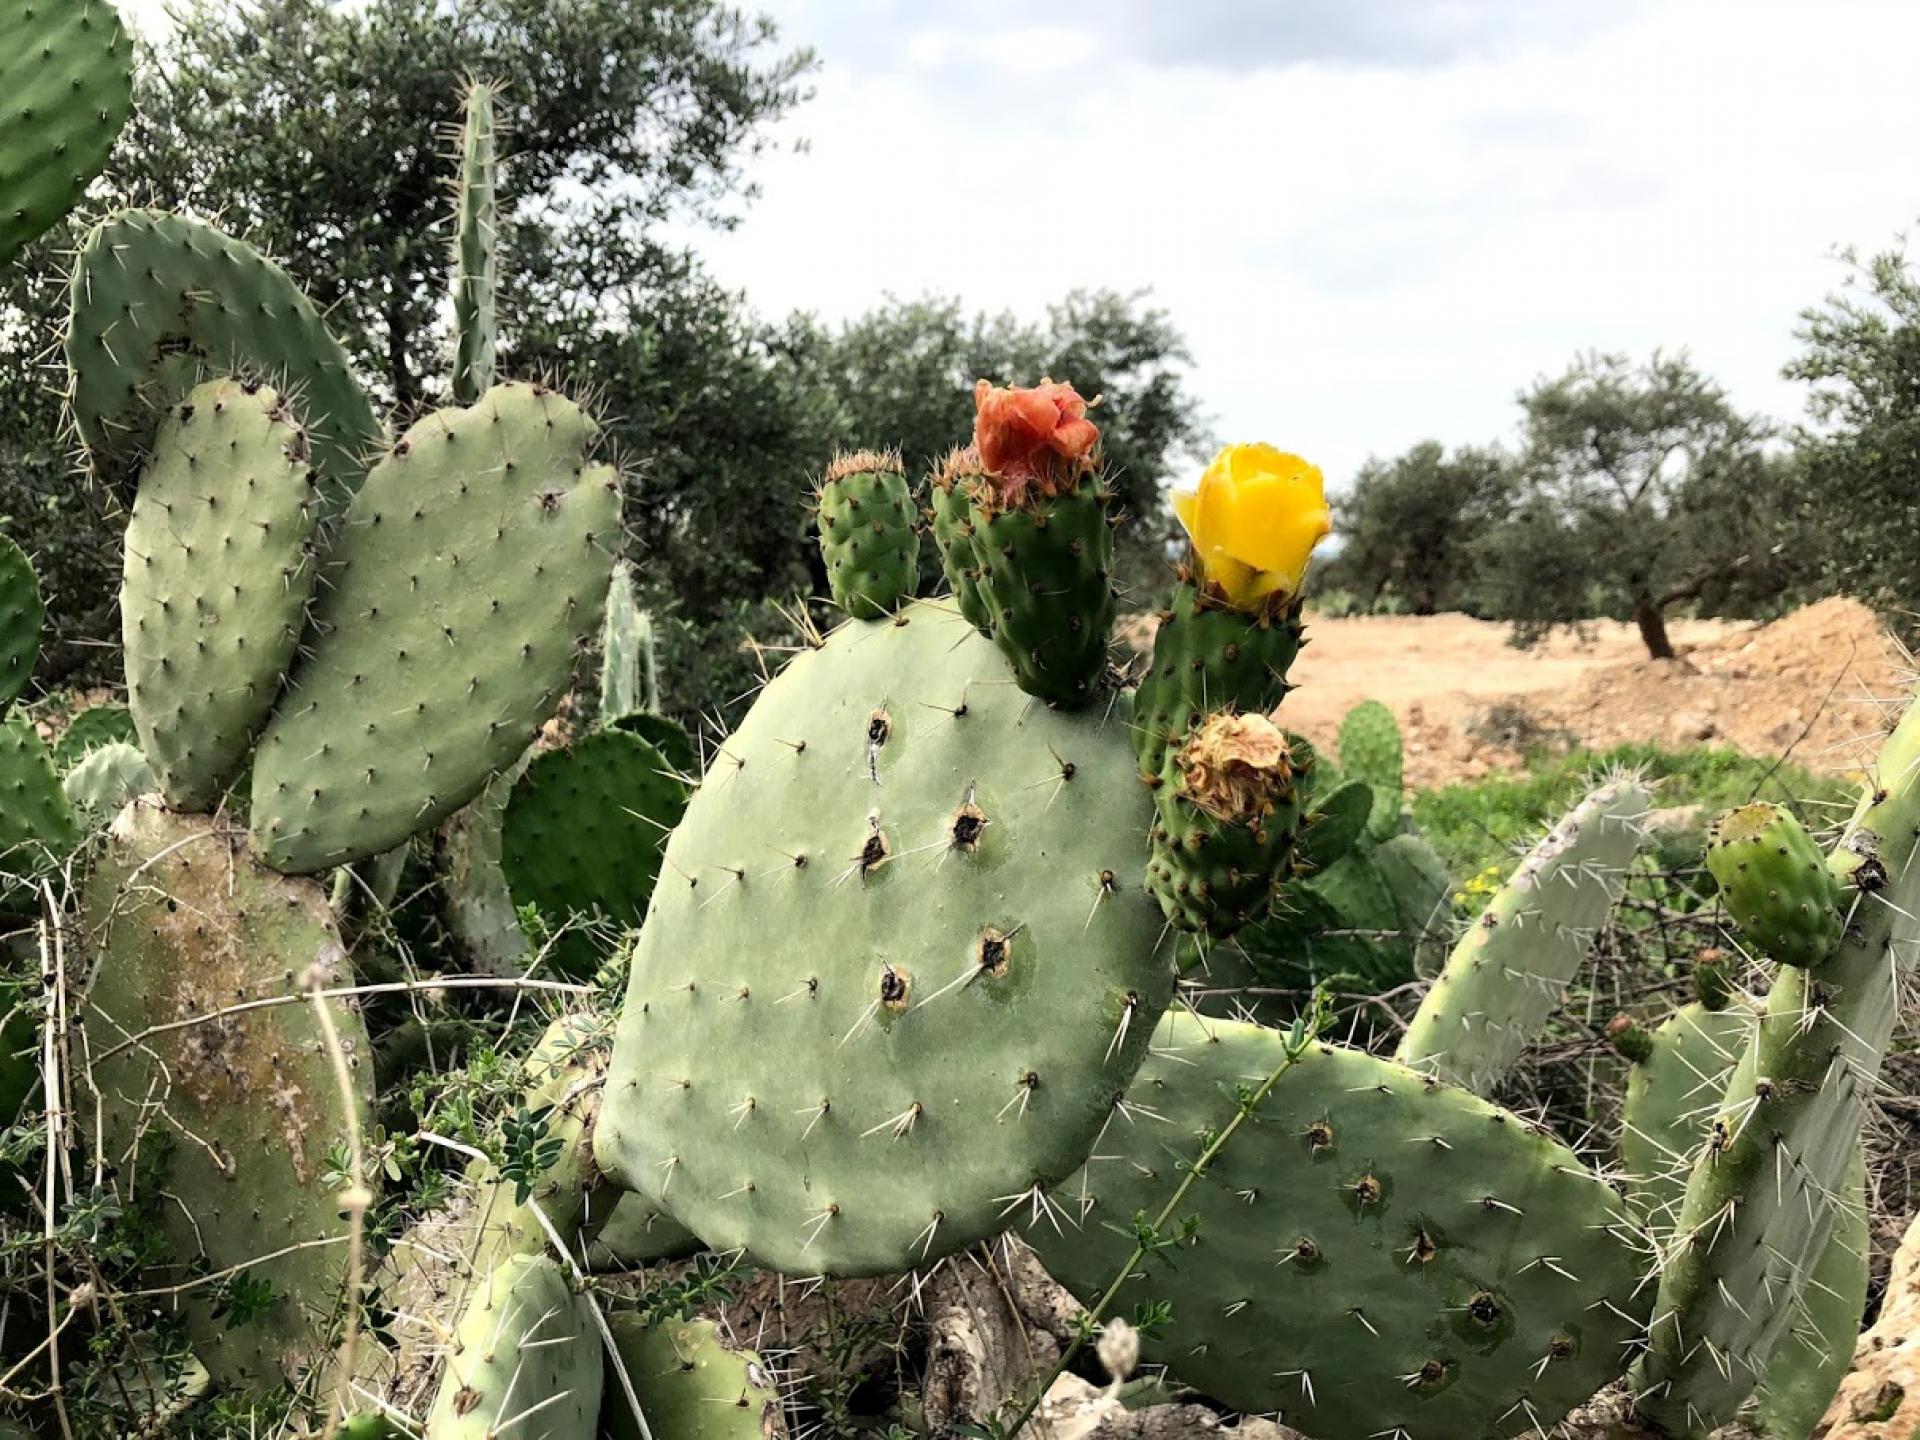 The prickly pear blossom